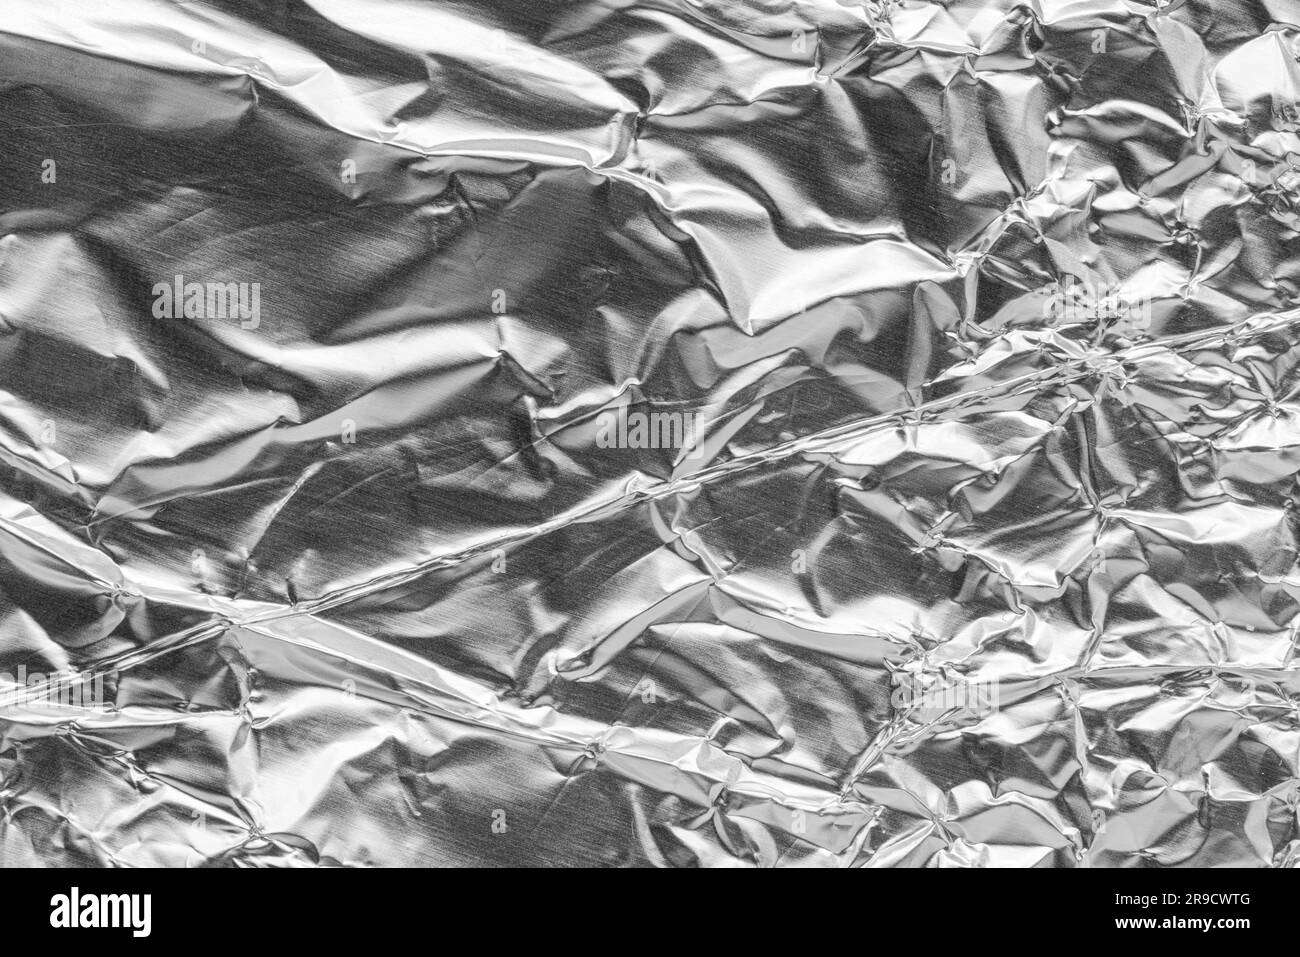 Crumpled bright shiny metallic silver aluminium foil background, flat lay view backdrop with copy space for text Stock Photo